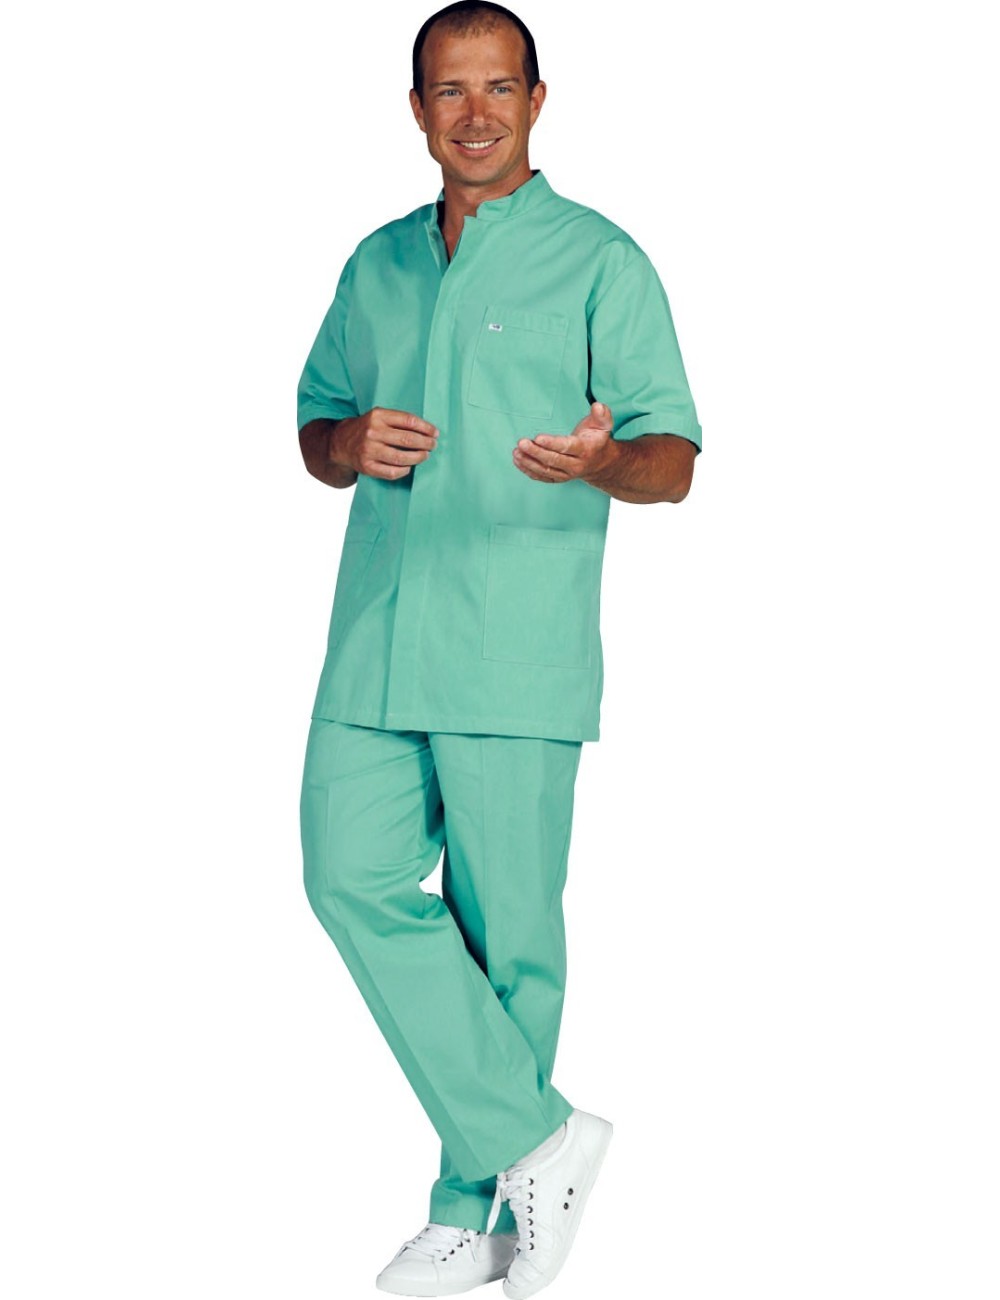 Medical tunic for men with hidden press studs.